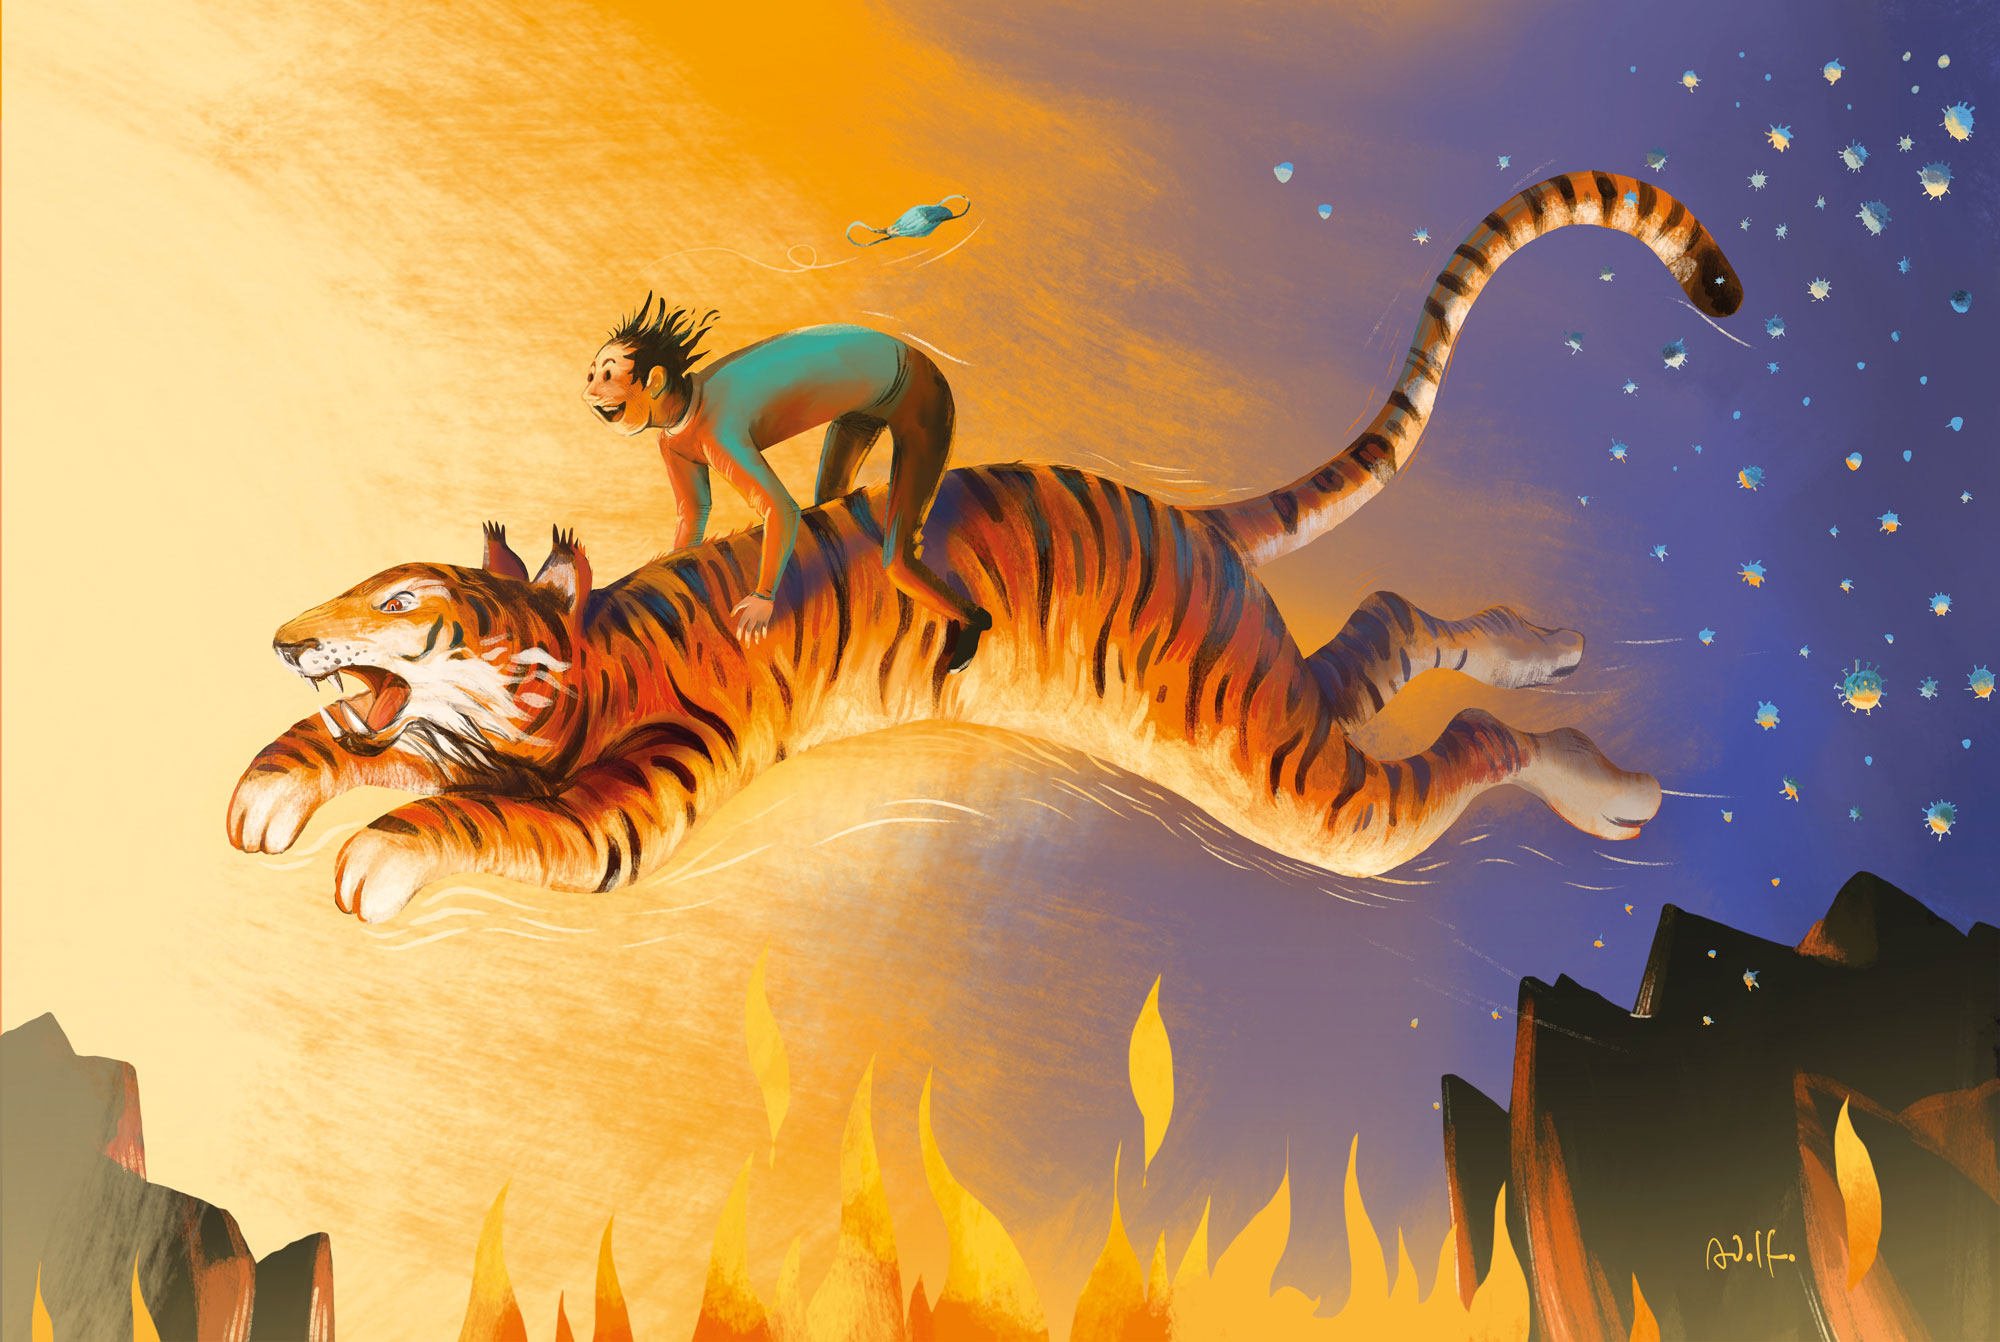 Year of the Tiger 2022: is your luck in or out? Zodiac sign predictions for love, health, career and wealth from two feng shui experts | South China Morning Post